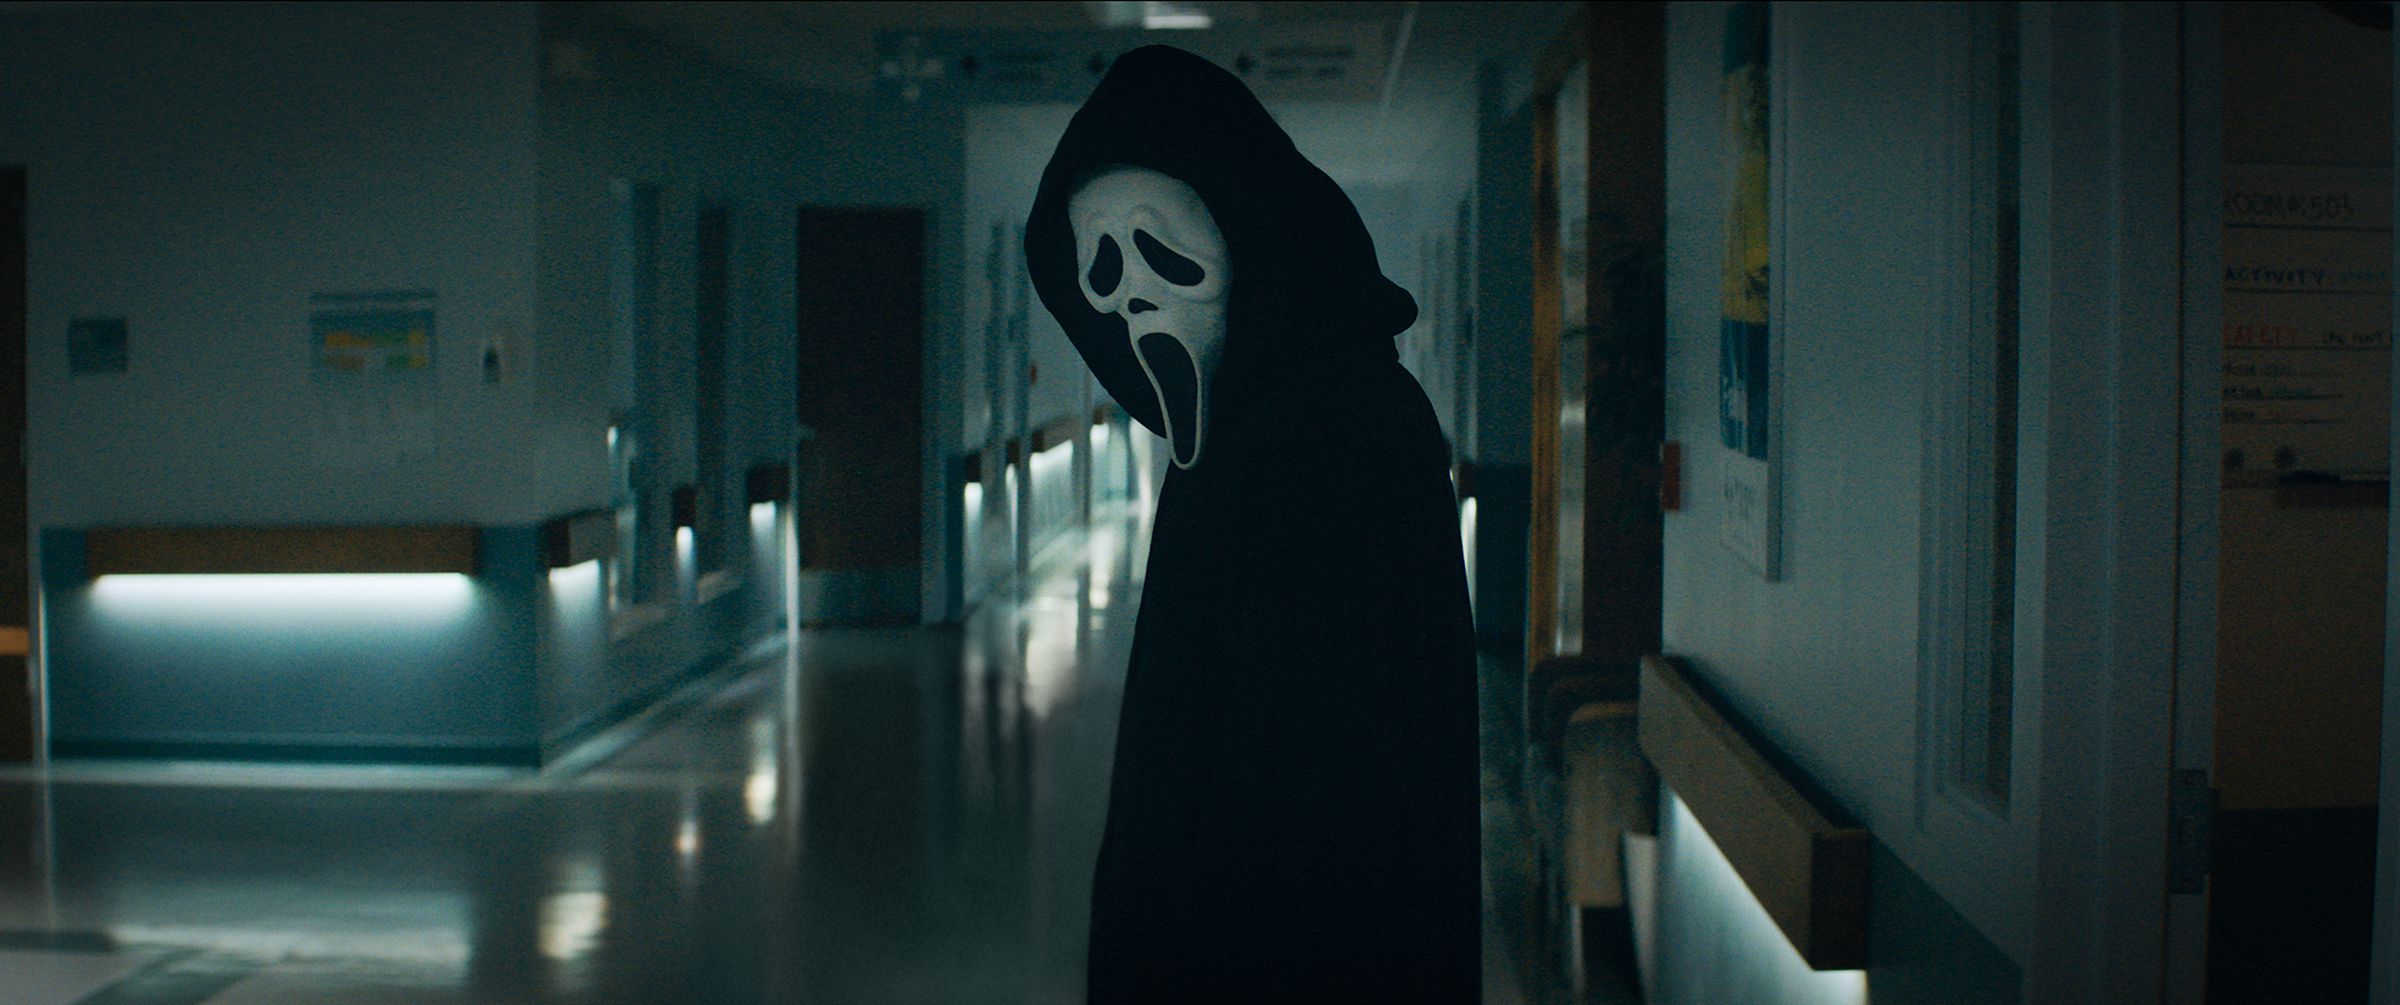 Ghostface has some new tricks up his sleeves in the new Scream re-boot.